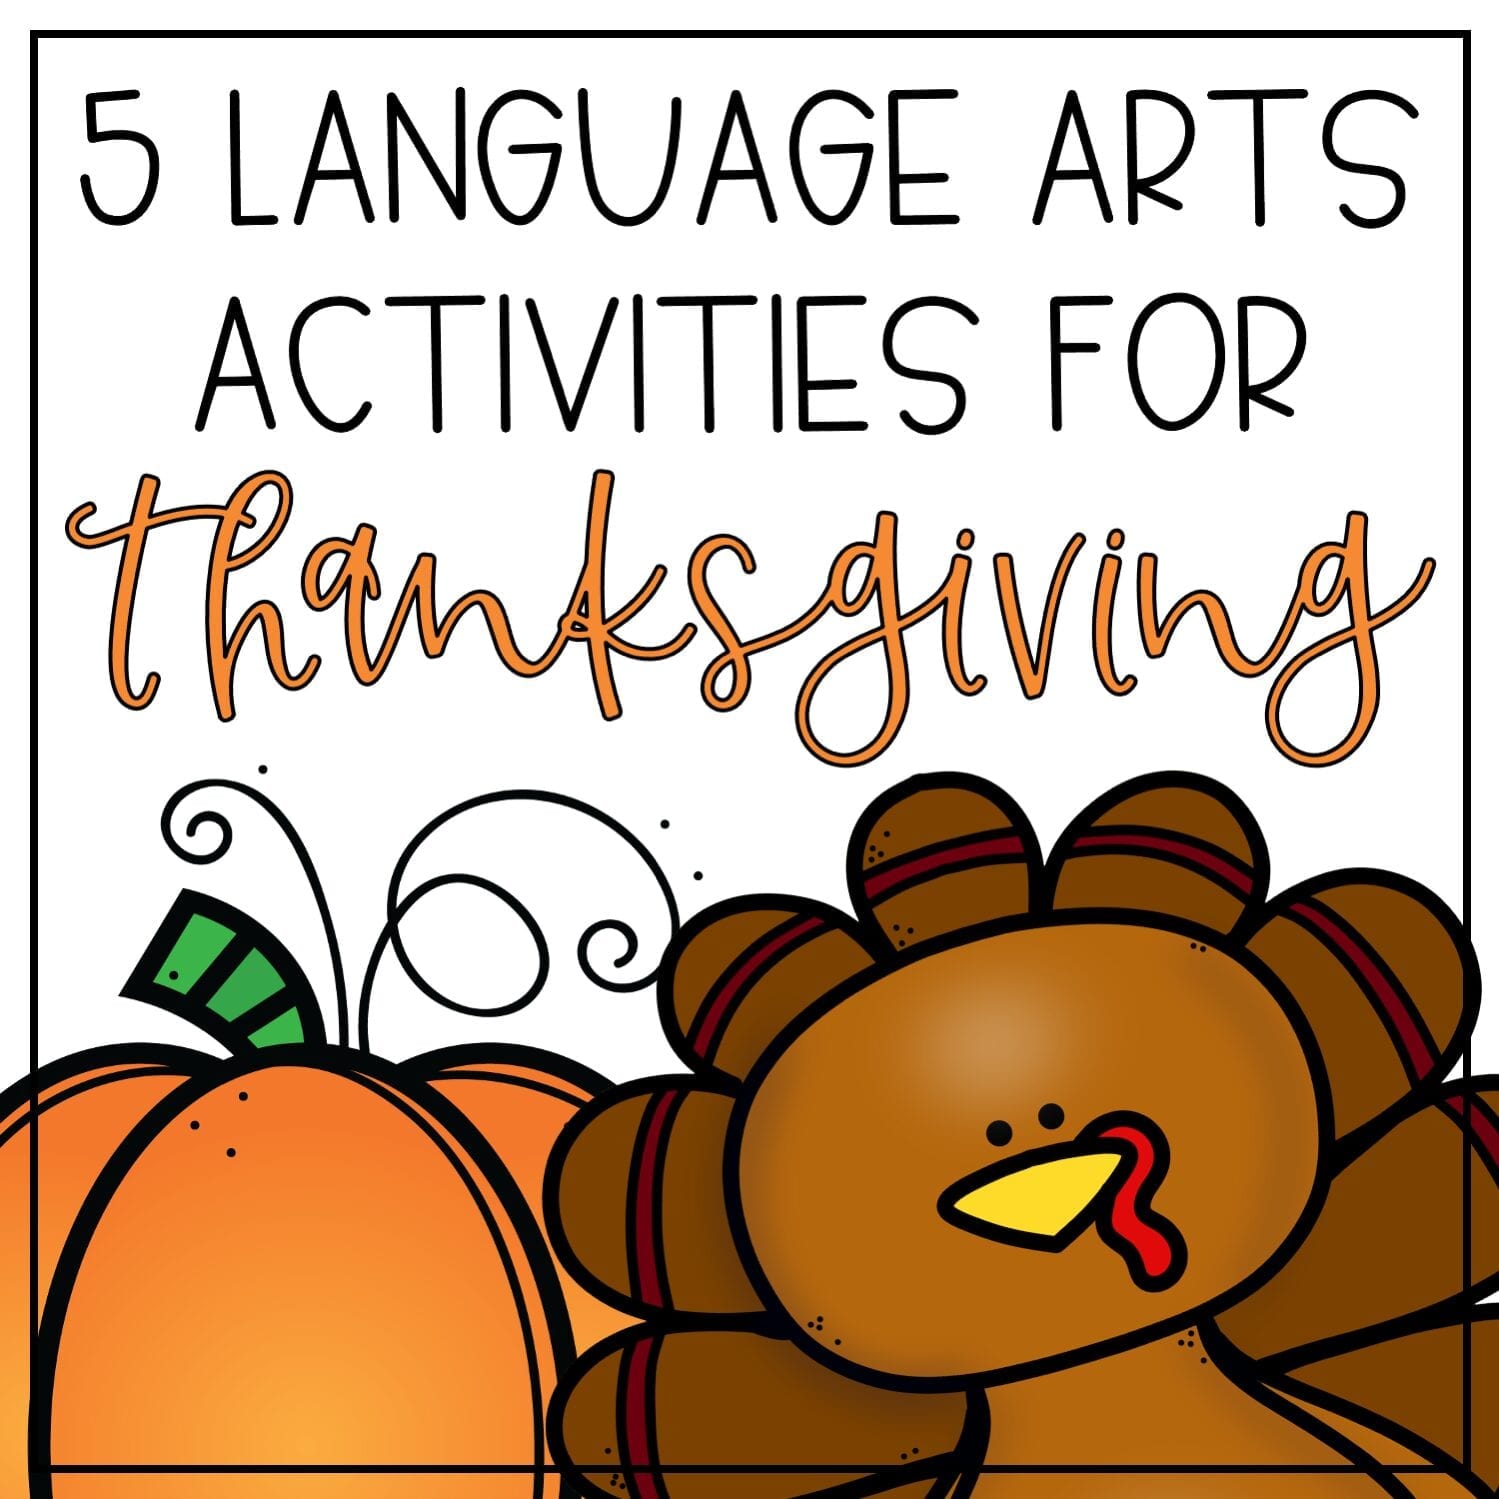 Language Arts Activities for Thanksgiving